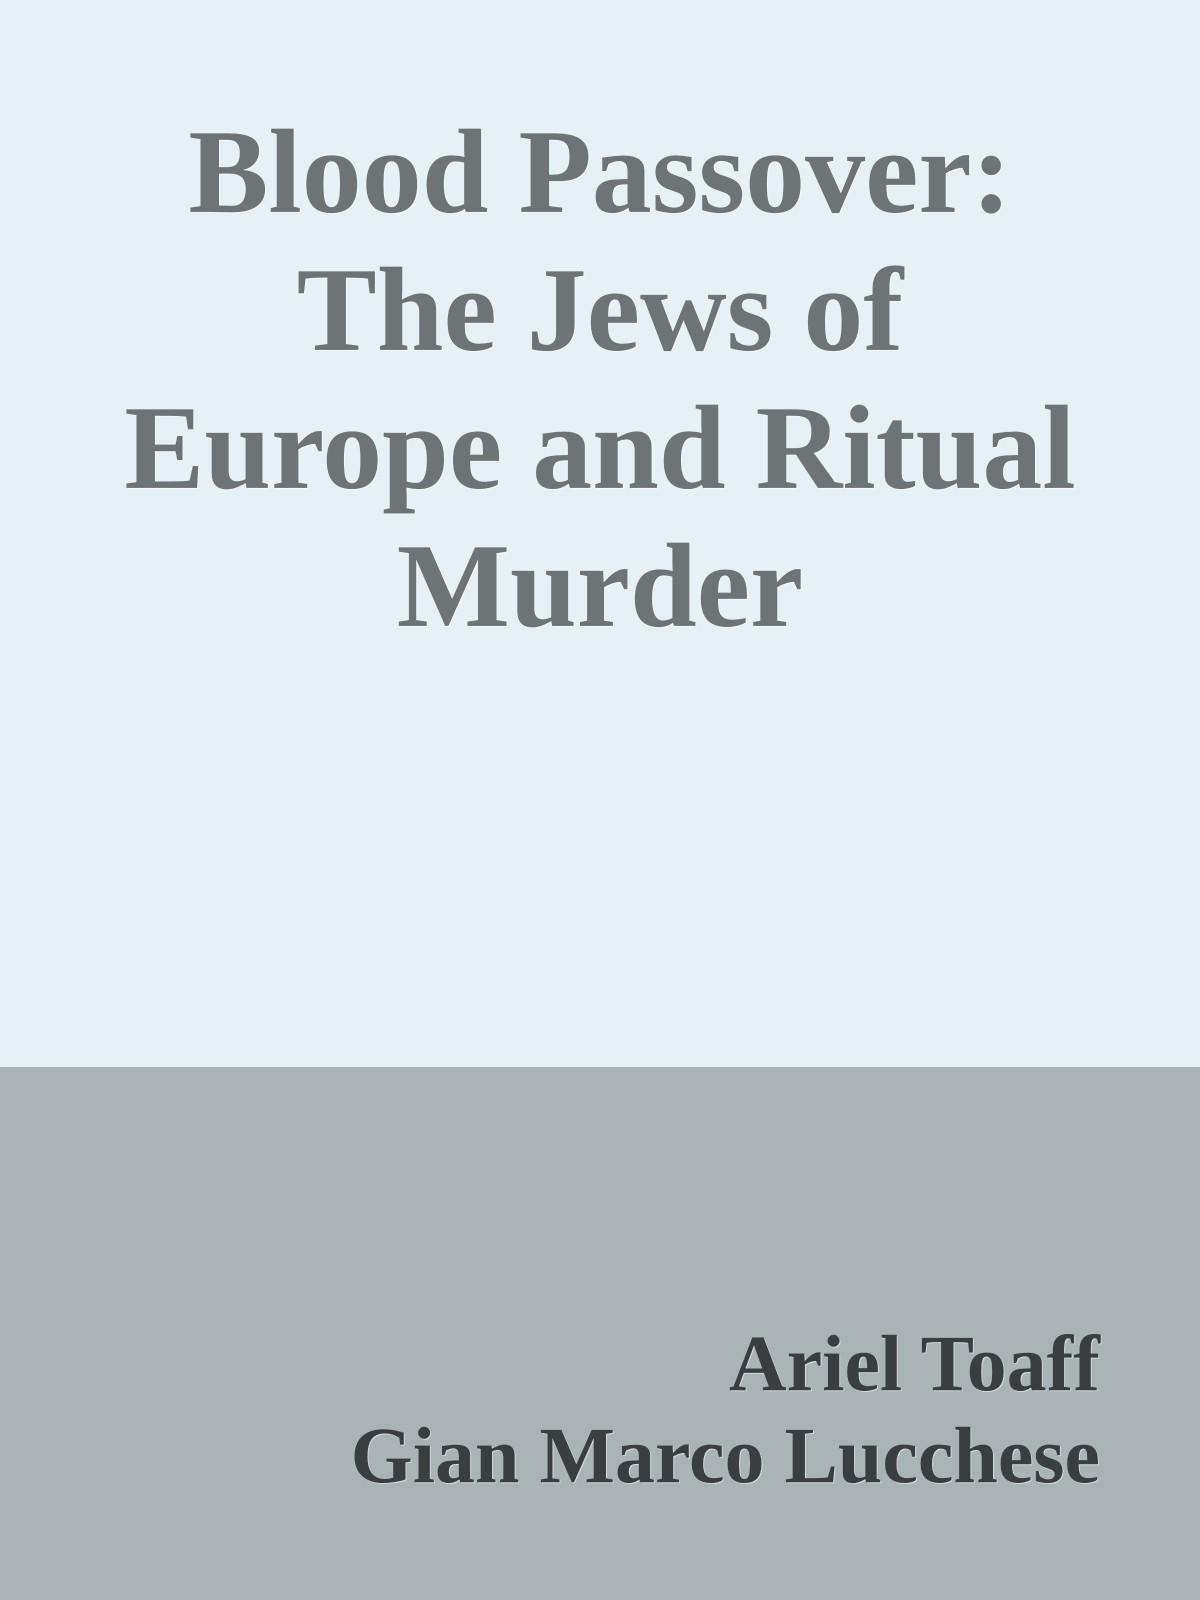 Blood Passover: The Jews of Europe and Ritual Murder (2016) by Ariel Toaff